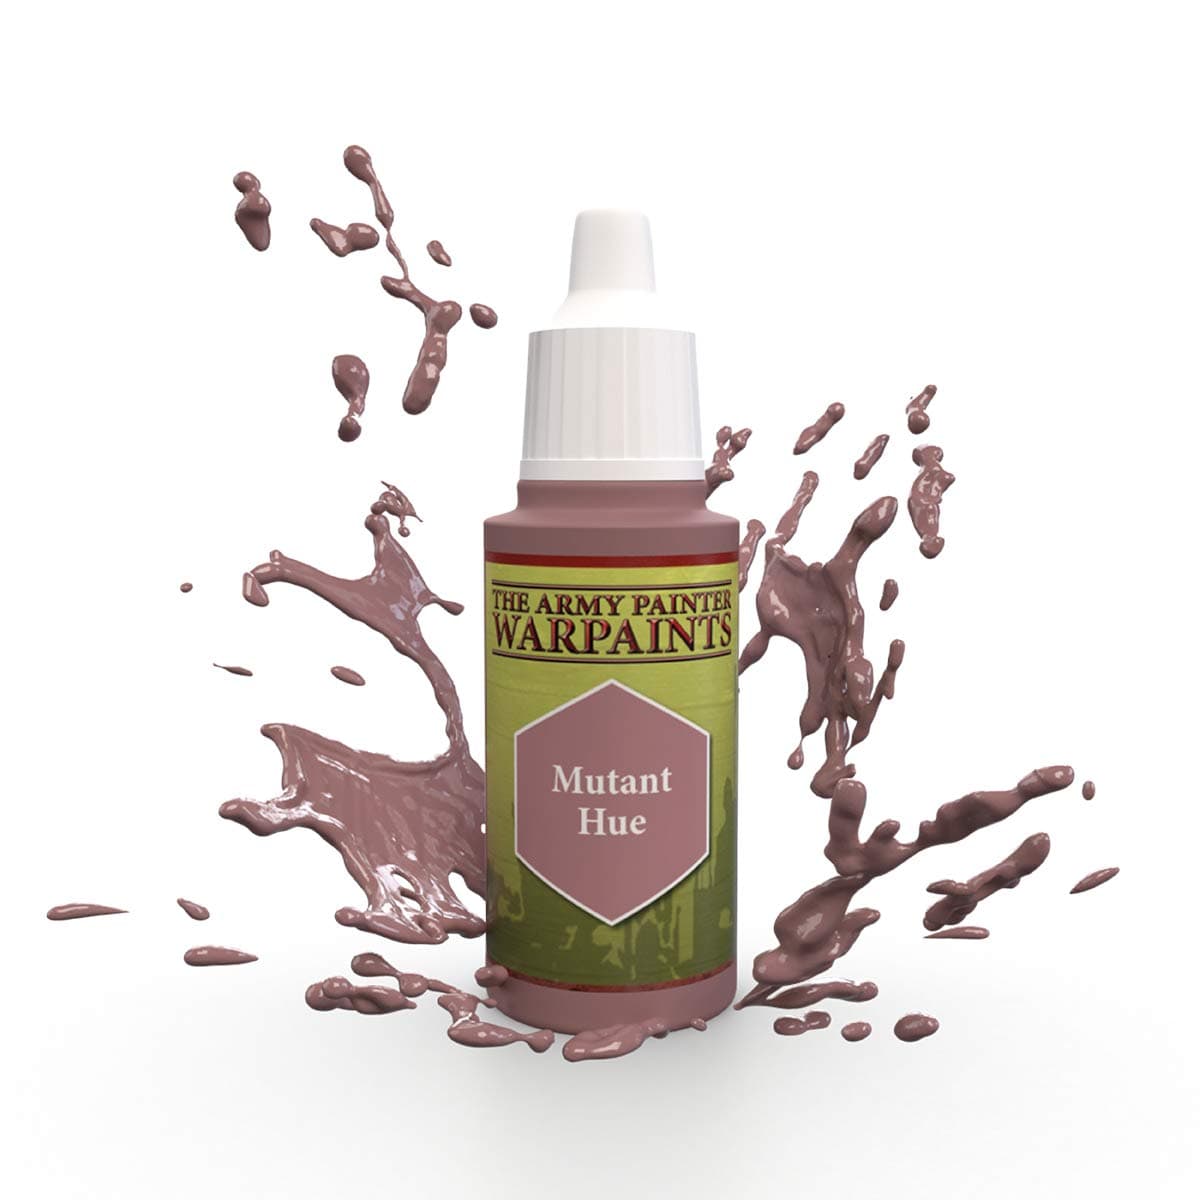 The Army Painter Accessories The Army Painter Warpaints: Mutant Hue 18ml